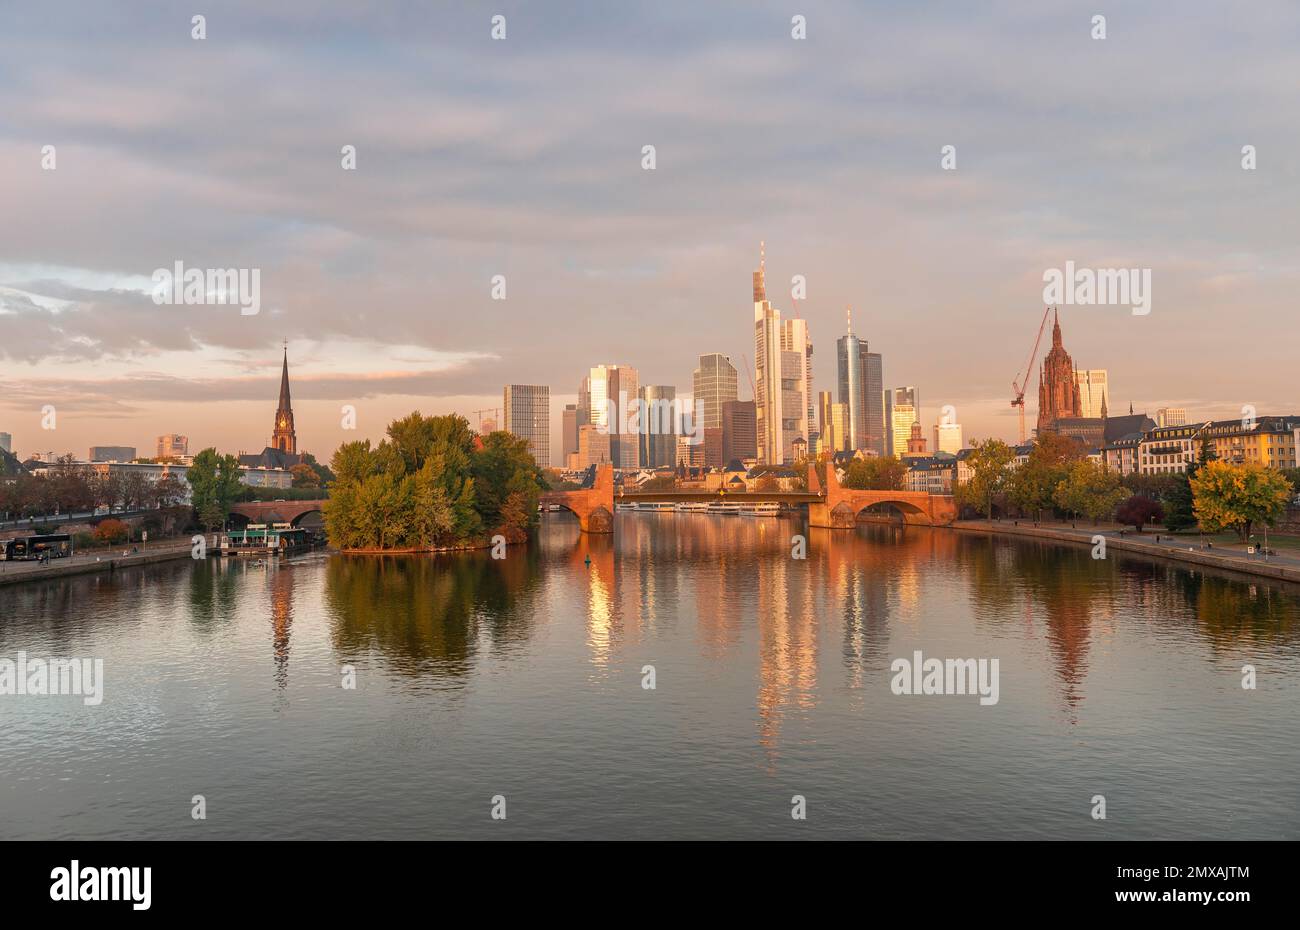 Skyline, skyscrapers in the banking district in the morning light, Old Bridge over the Main, sunrise, autumn, Frankfurt am Main, Hesse, Germany Stock Photo